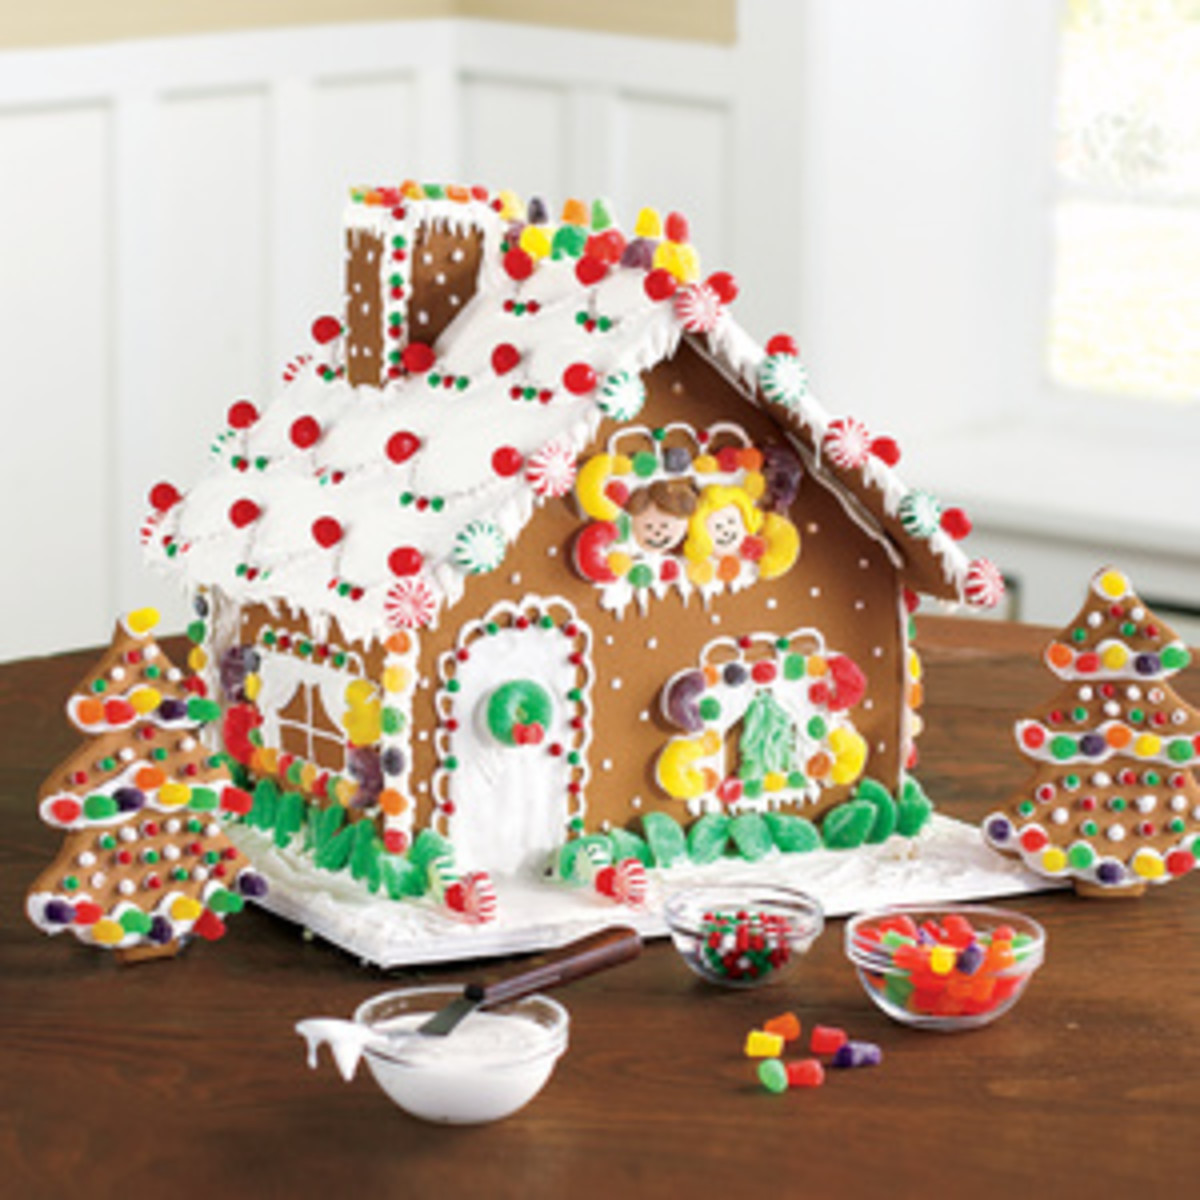 How To Build A Simple But Beautiful Gingerbread House | HubPages